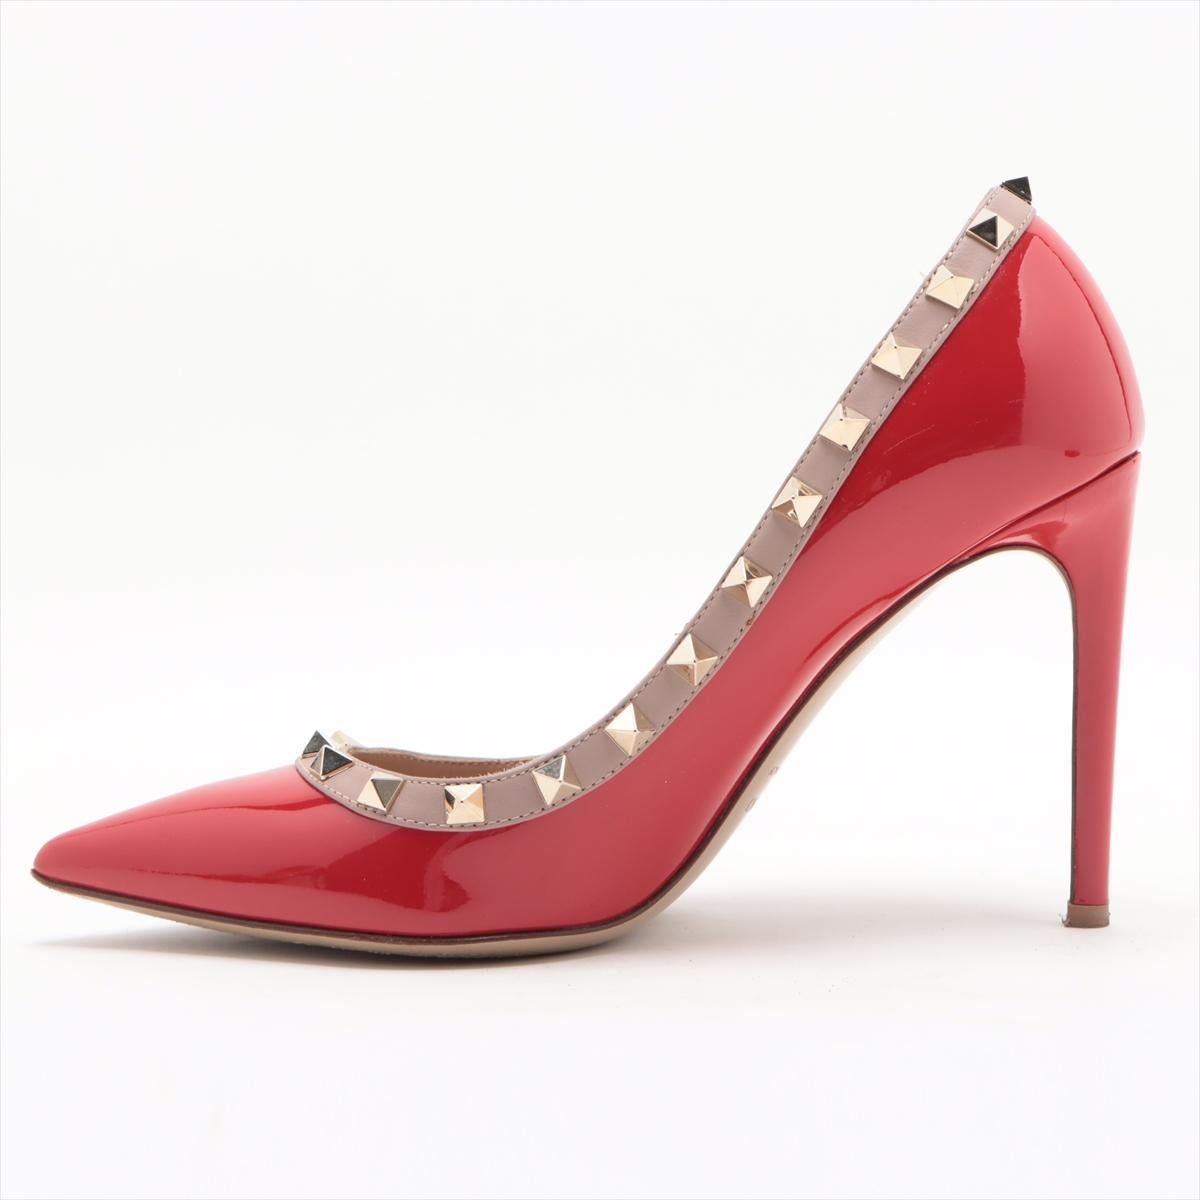 Valentino Garavani Rockstud Pointed-toe Patent Leather Pump Red For Sale 2